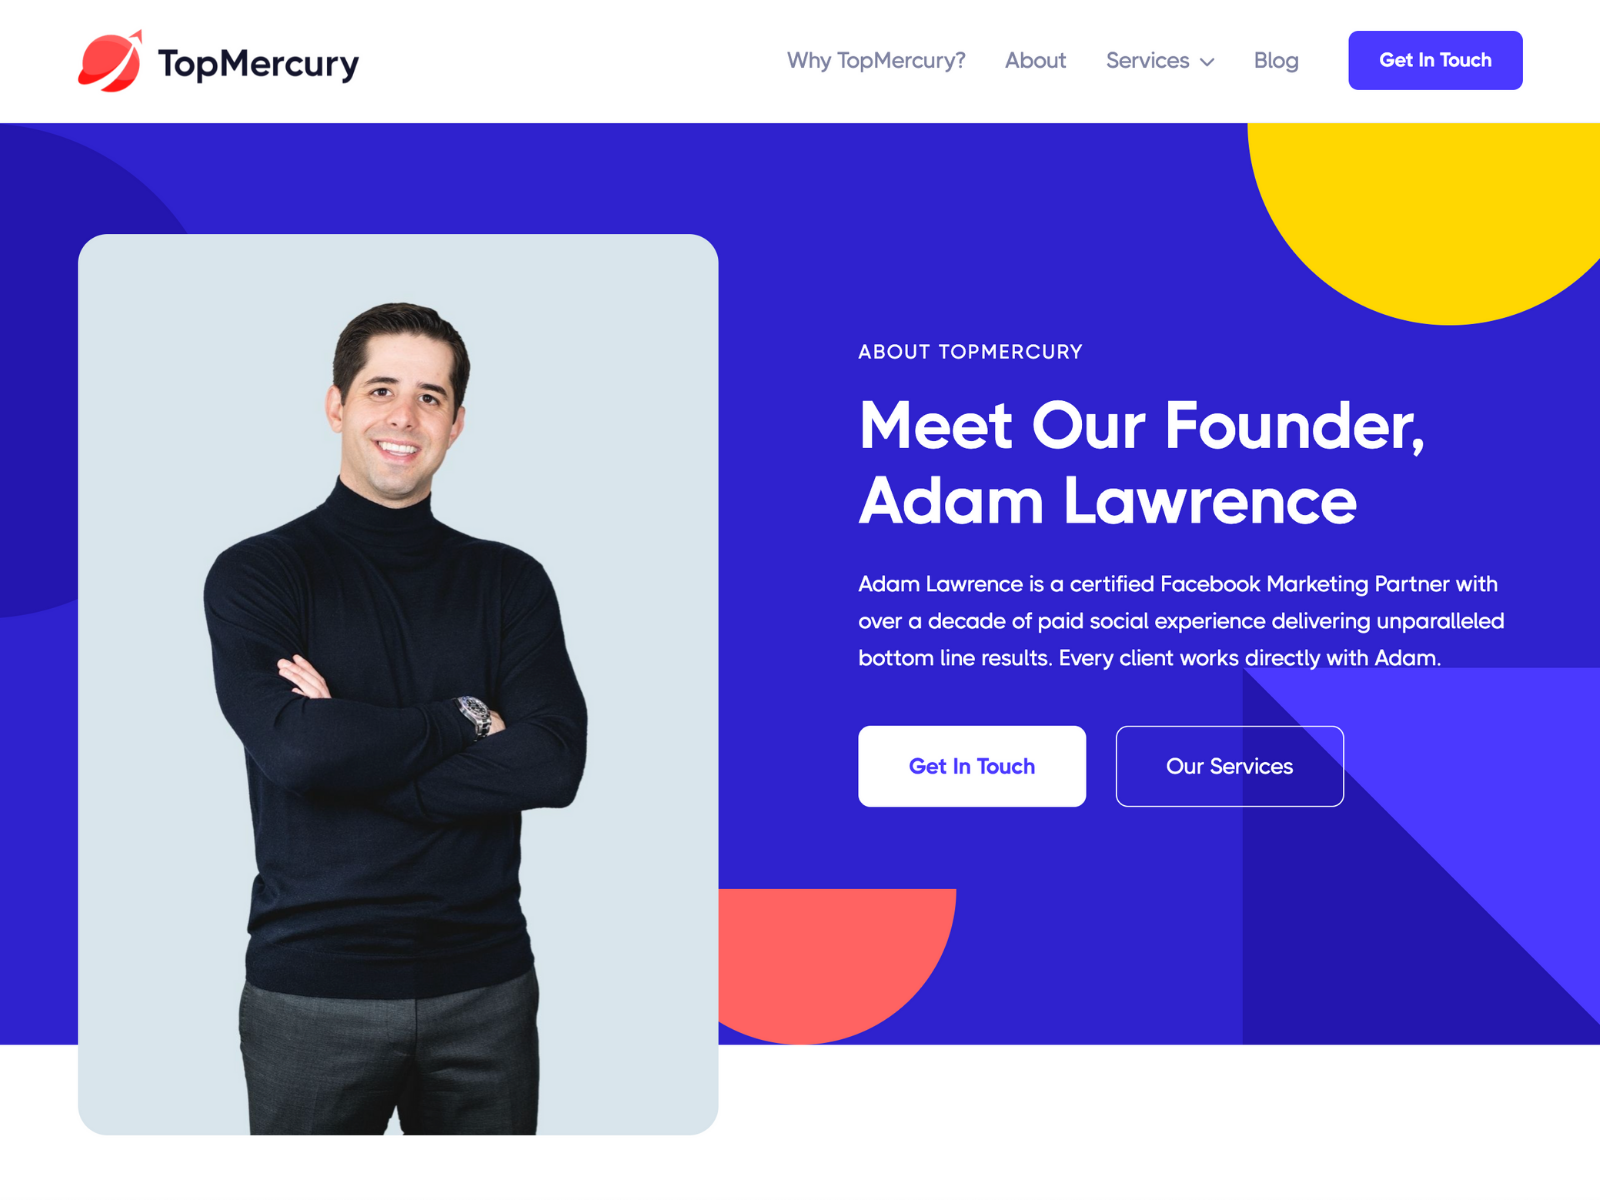 TopMercury About Us Page